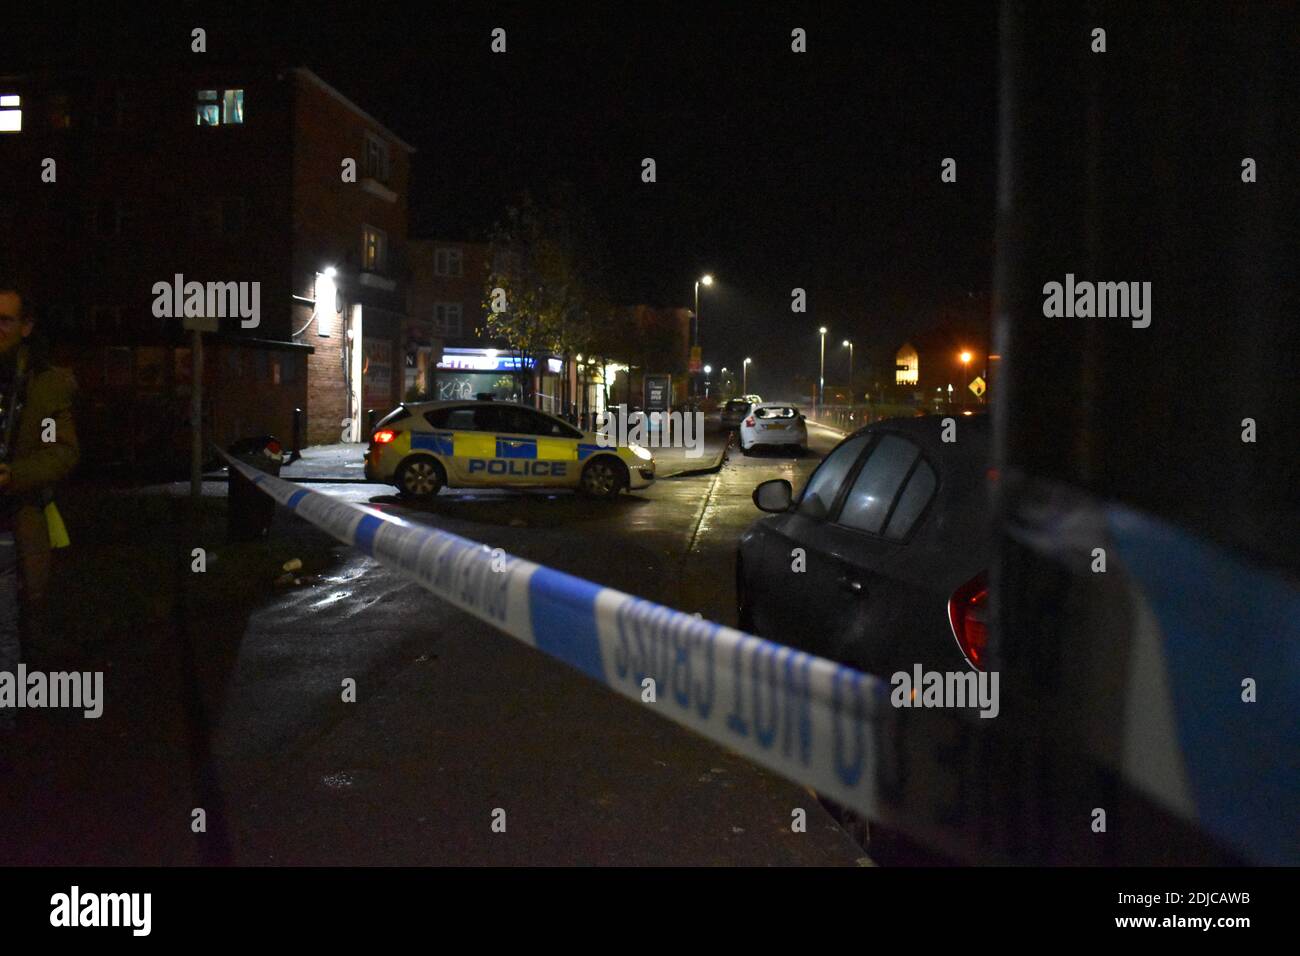 Police cordoned off coronation square in Southcote Lane, Reading Berkshire. Charles Dye / Alamy Live News Stock Photo